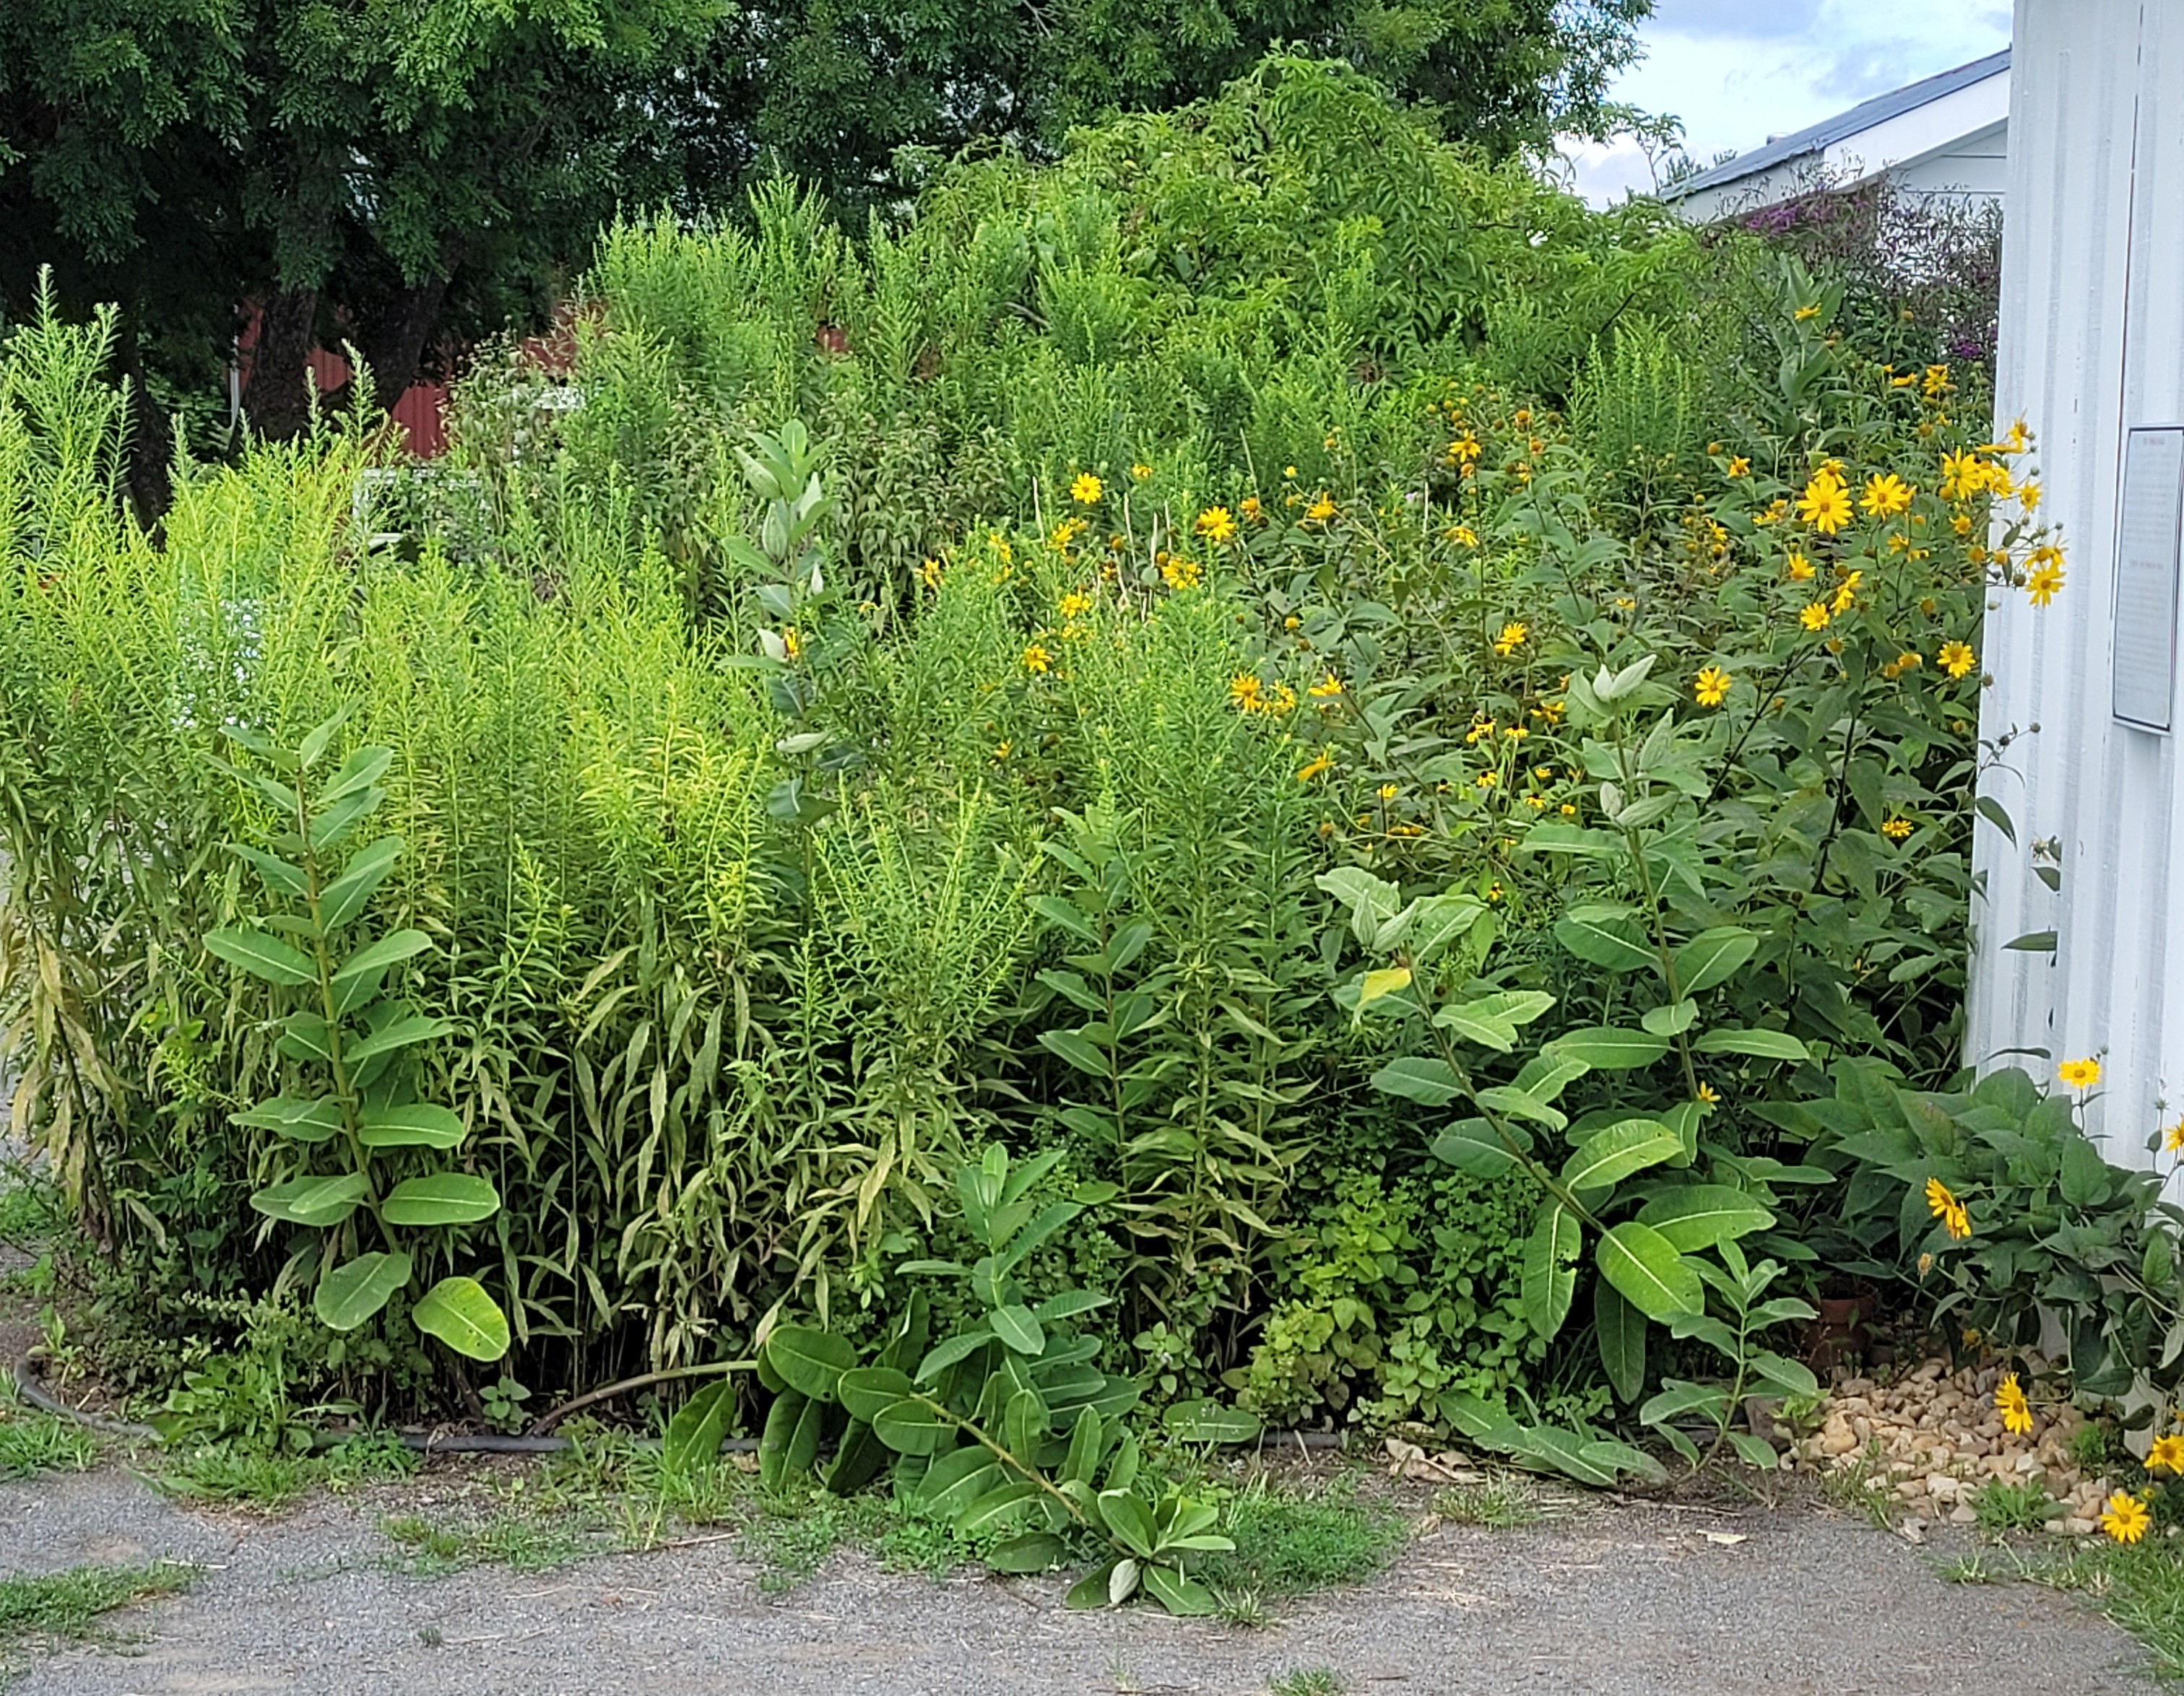 A pollinator garden with many yellow flowers